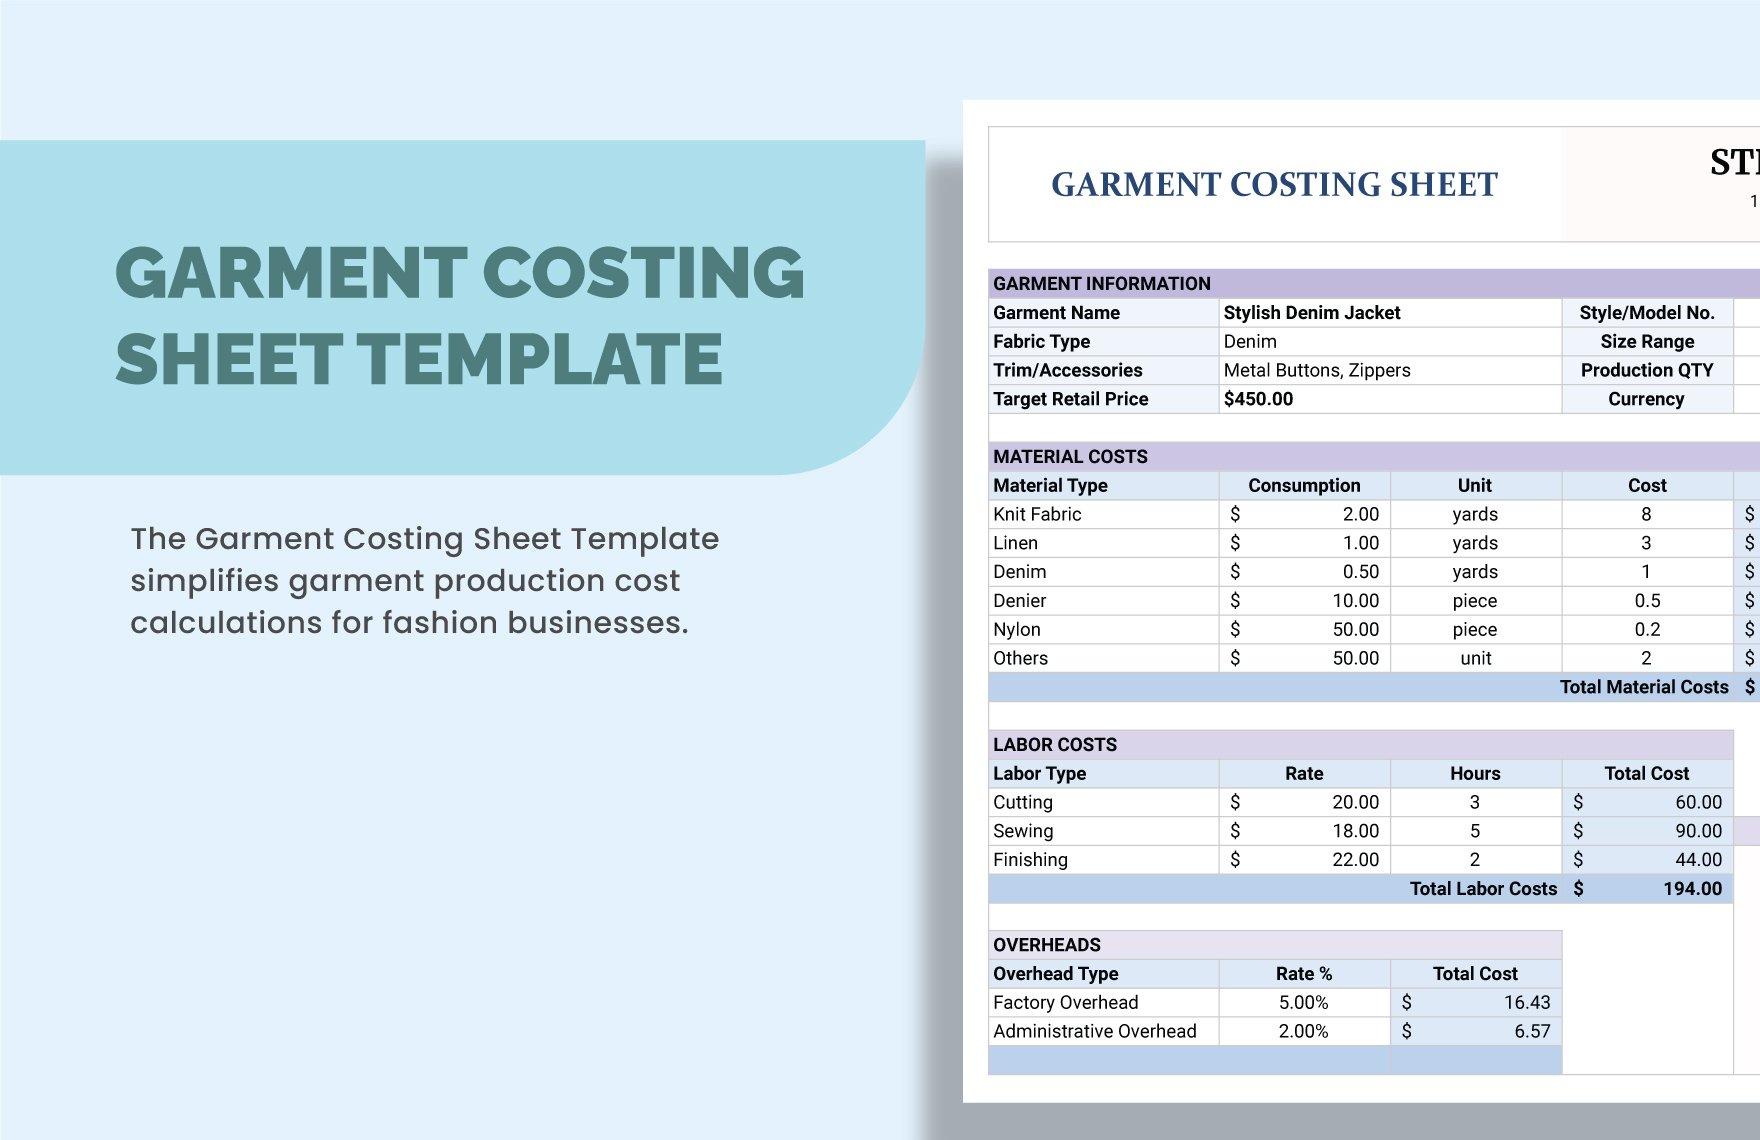 Garment Costing Sheet Template in Excel, Google Sheets